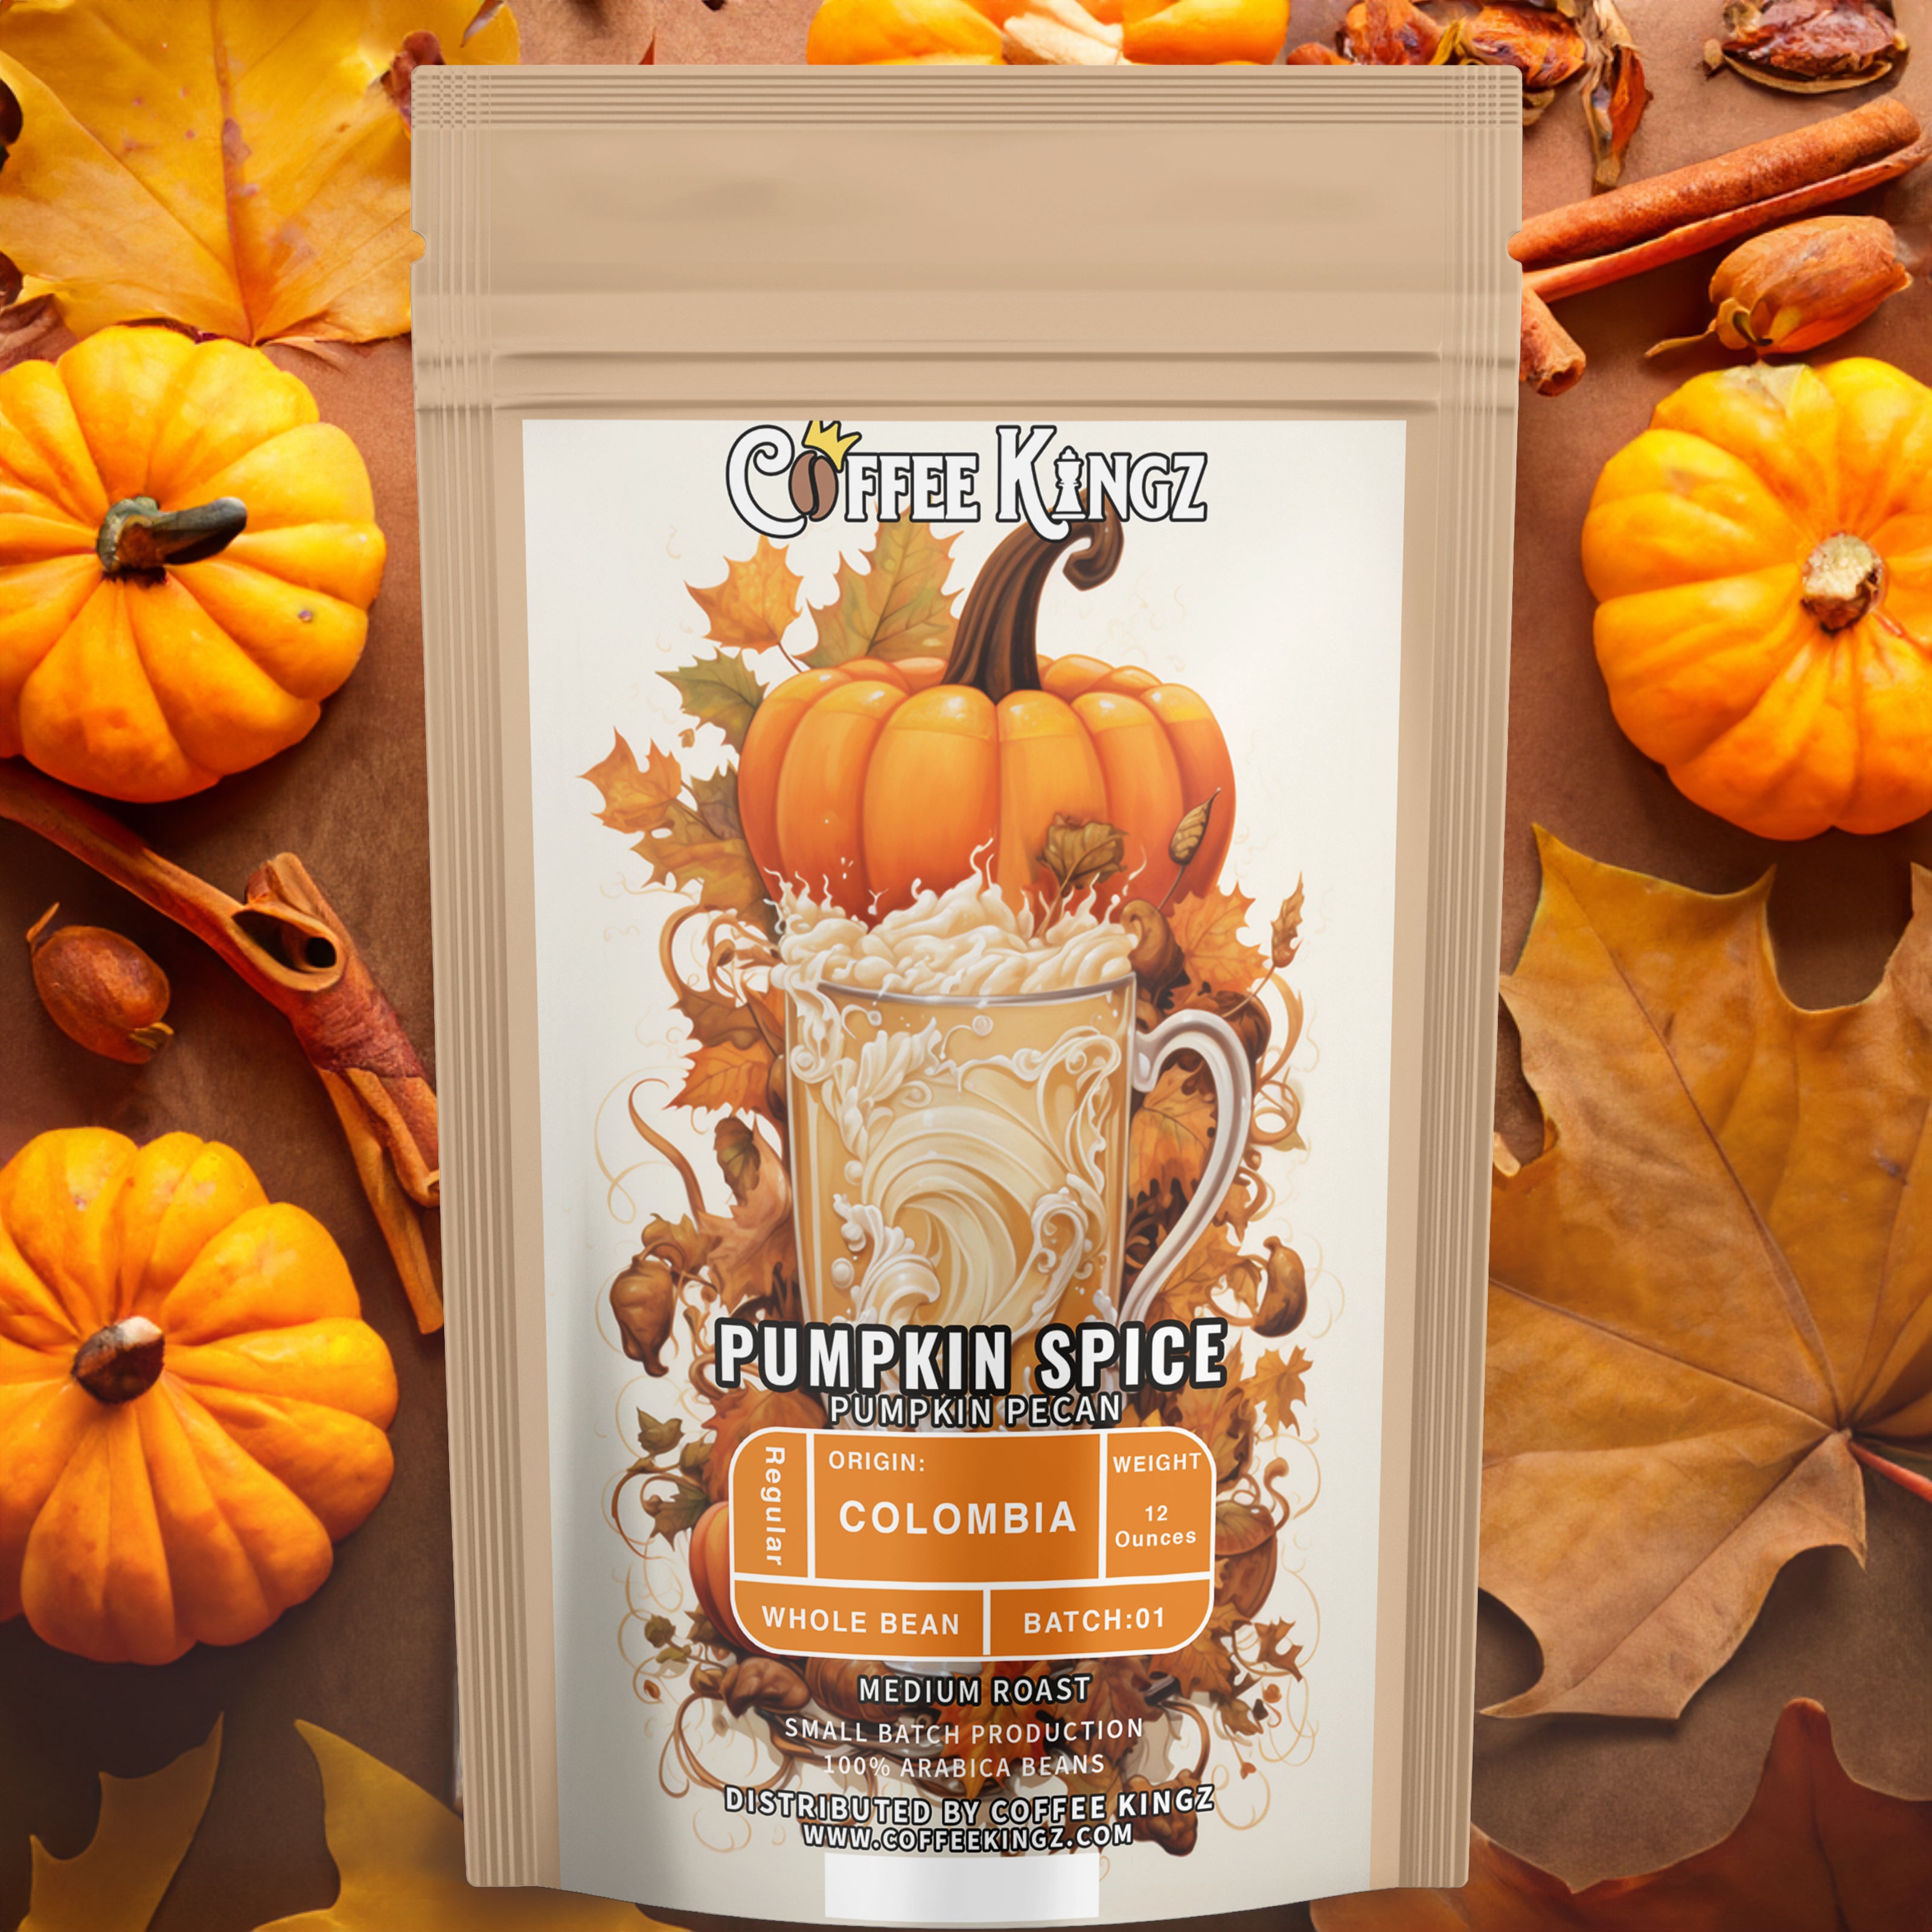 A limited-time festive bag of Coffee Kingz pumpkin spice pecan flavored coffee beans, medium roast, surrounded by autumn leaves and pumpkins, evoking a cozy, fall atmosphere.